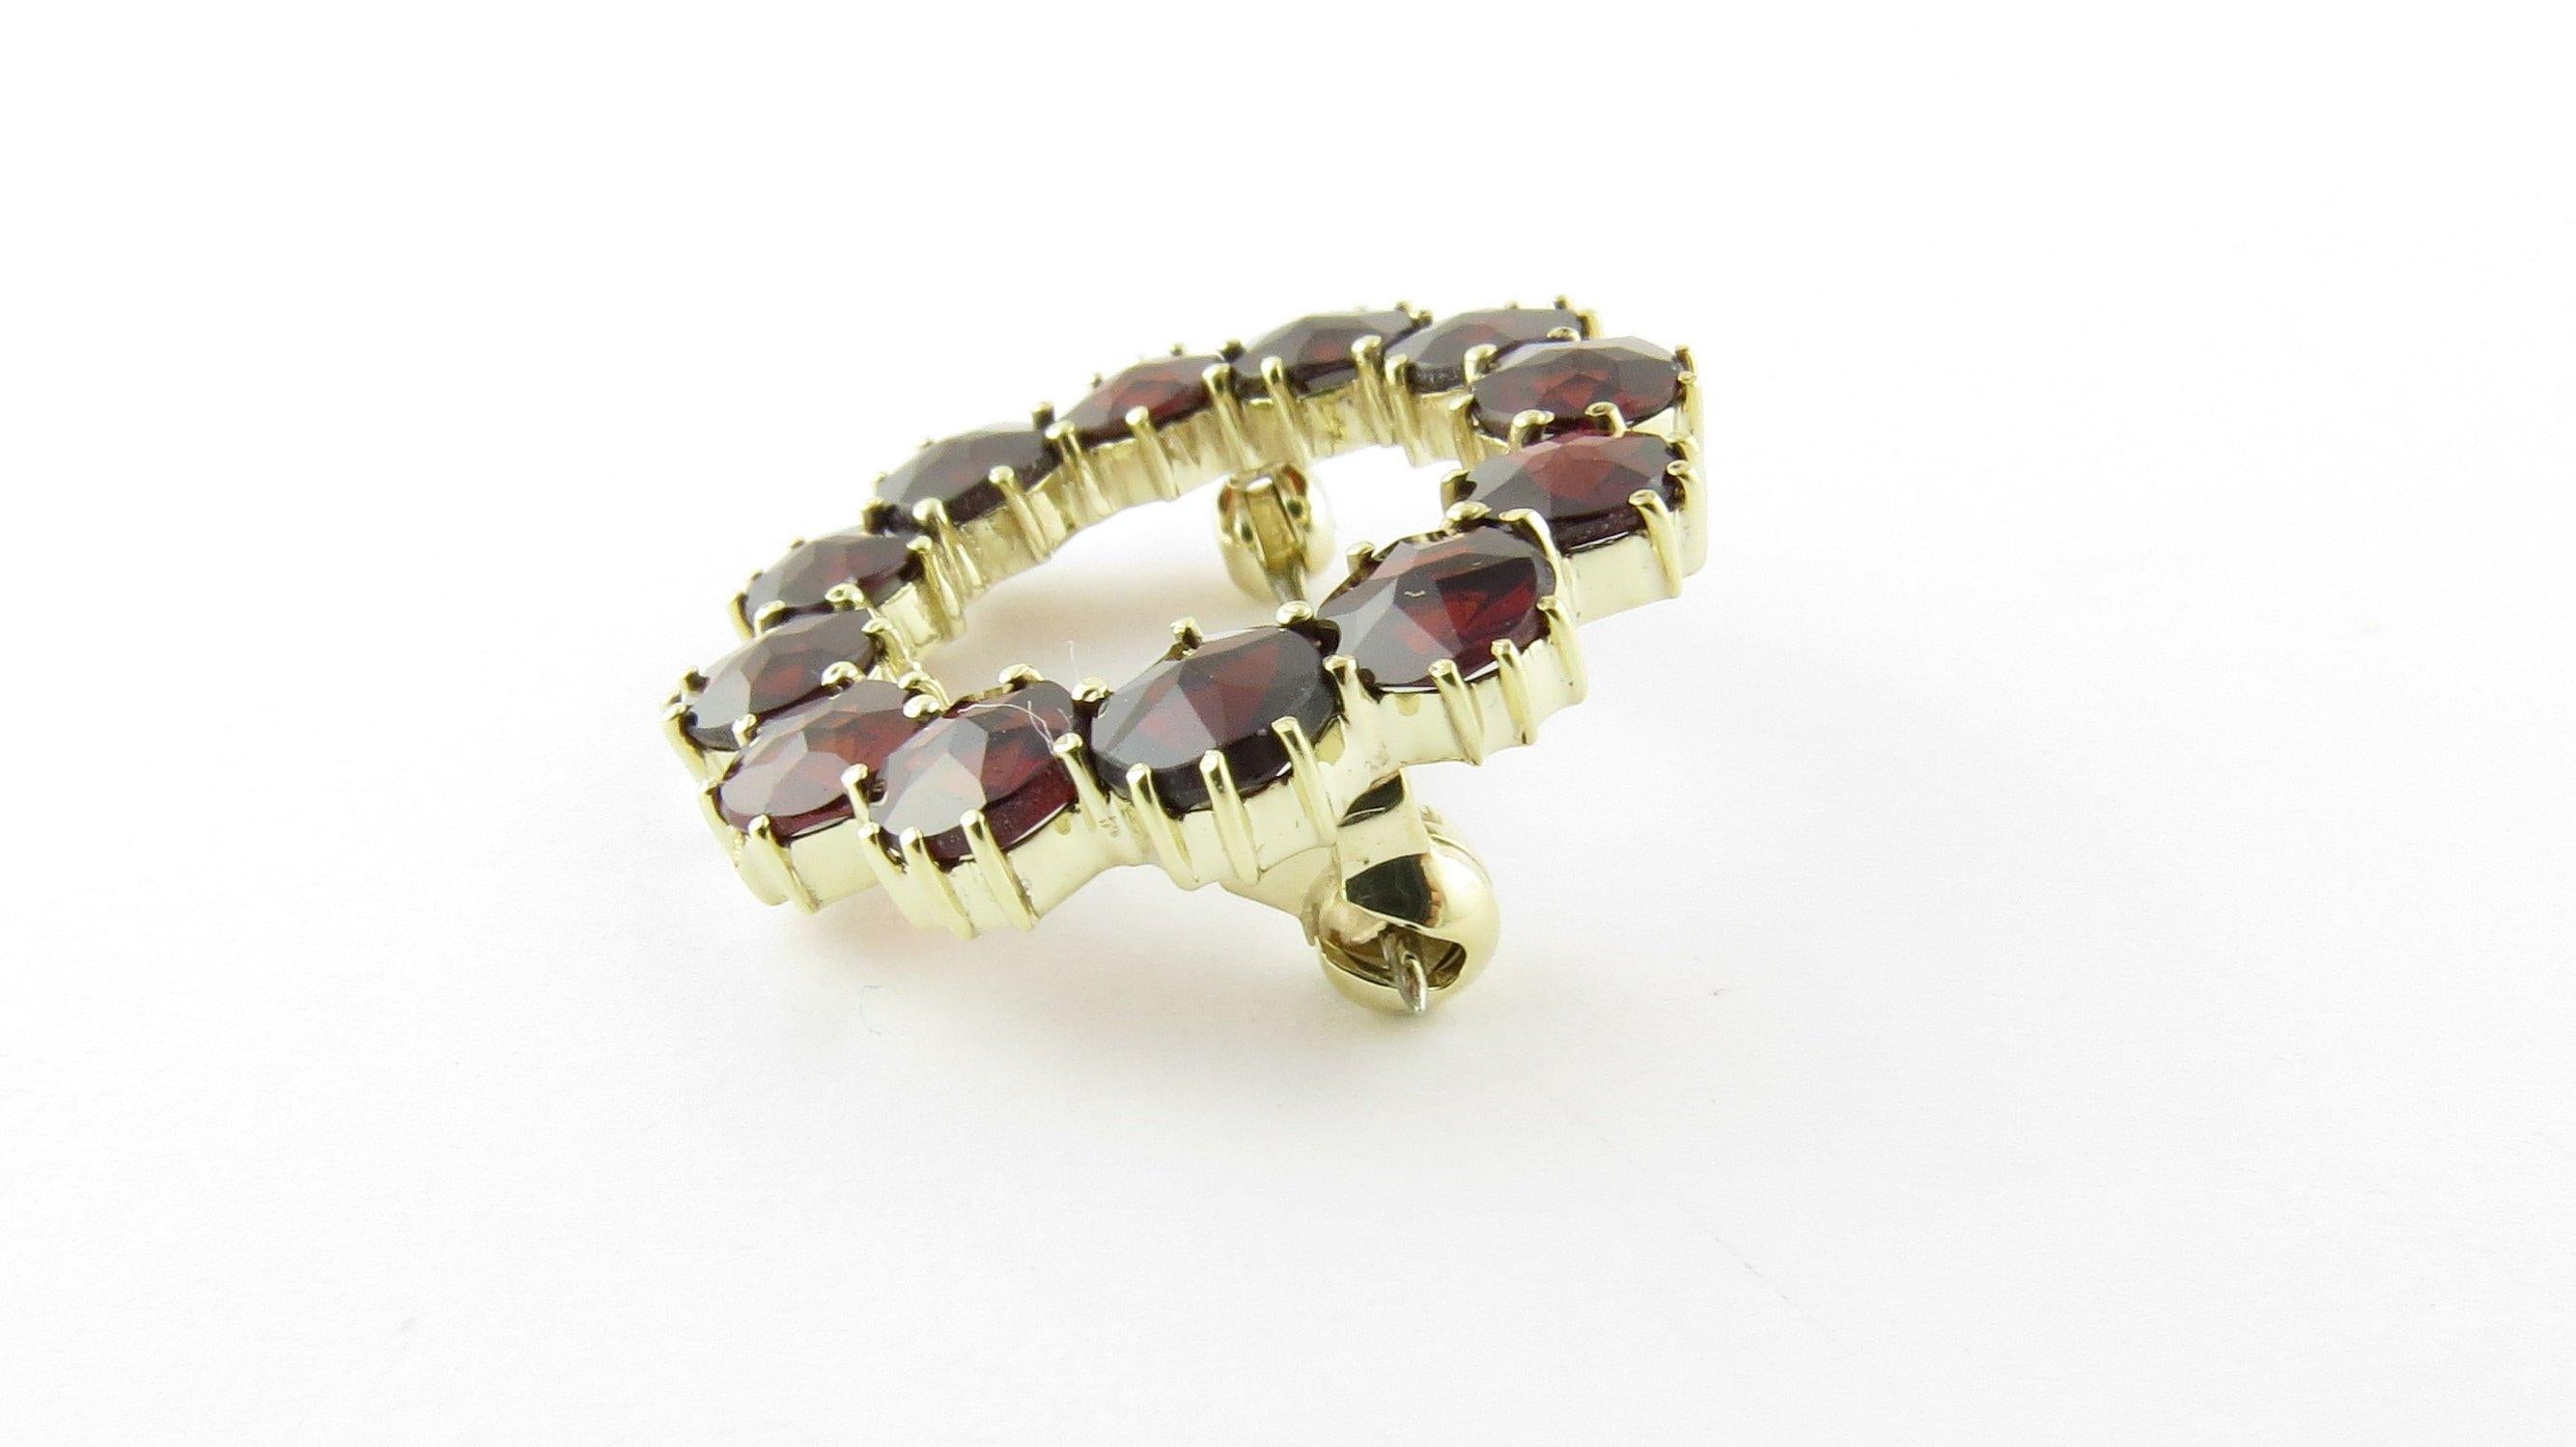 Vintage 14 Karat Yellow Gold Garnet Brooch/Pin- This lovely circle pin features 12 round garnets (5 mm each) set in classic 14K gold. Size: 24 mm Weight: 2.1 dwt. / 3.4 gr. Acid tested for 14K gold. Very good condition, professionally polished.